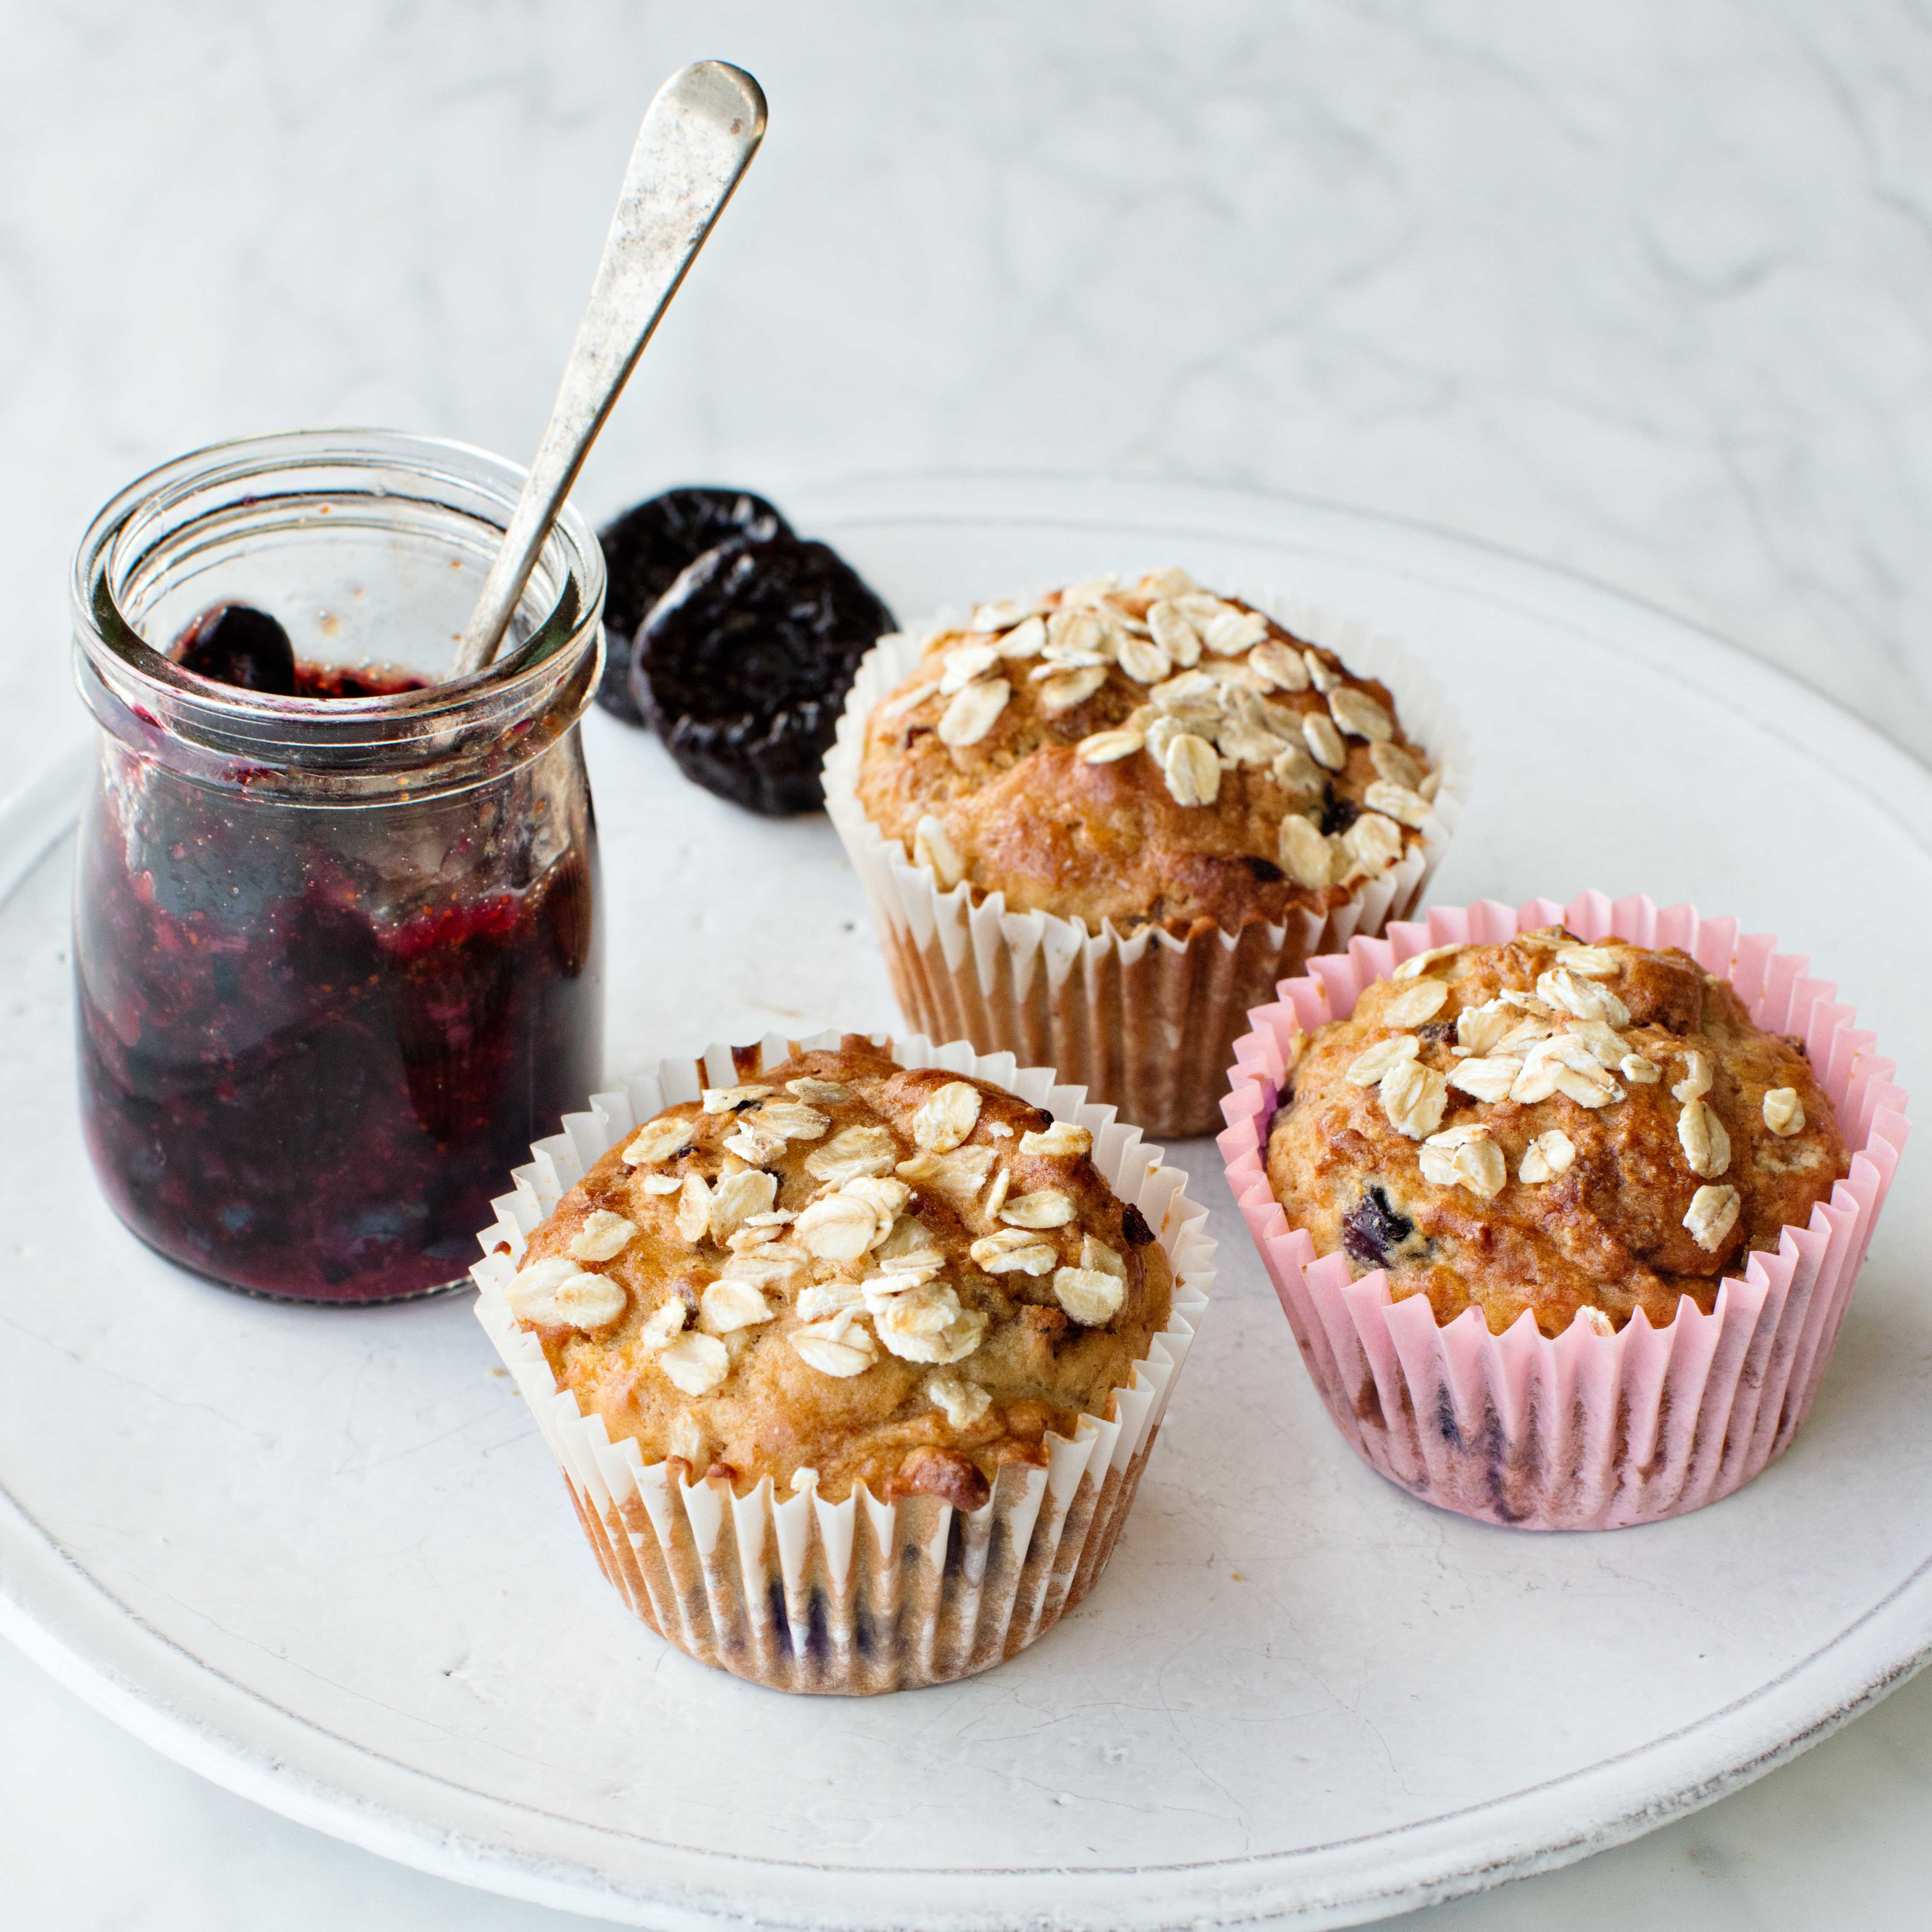 Oatmeal Muffins with Prunes and Blueberries